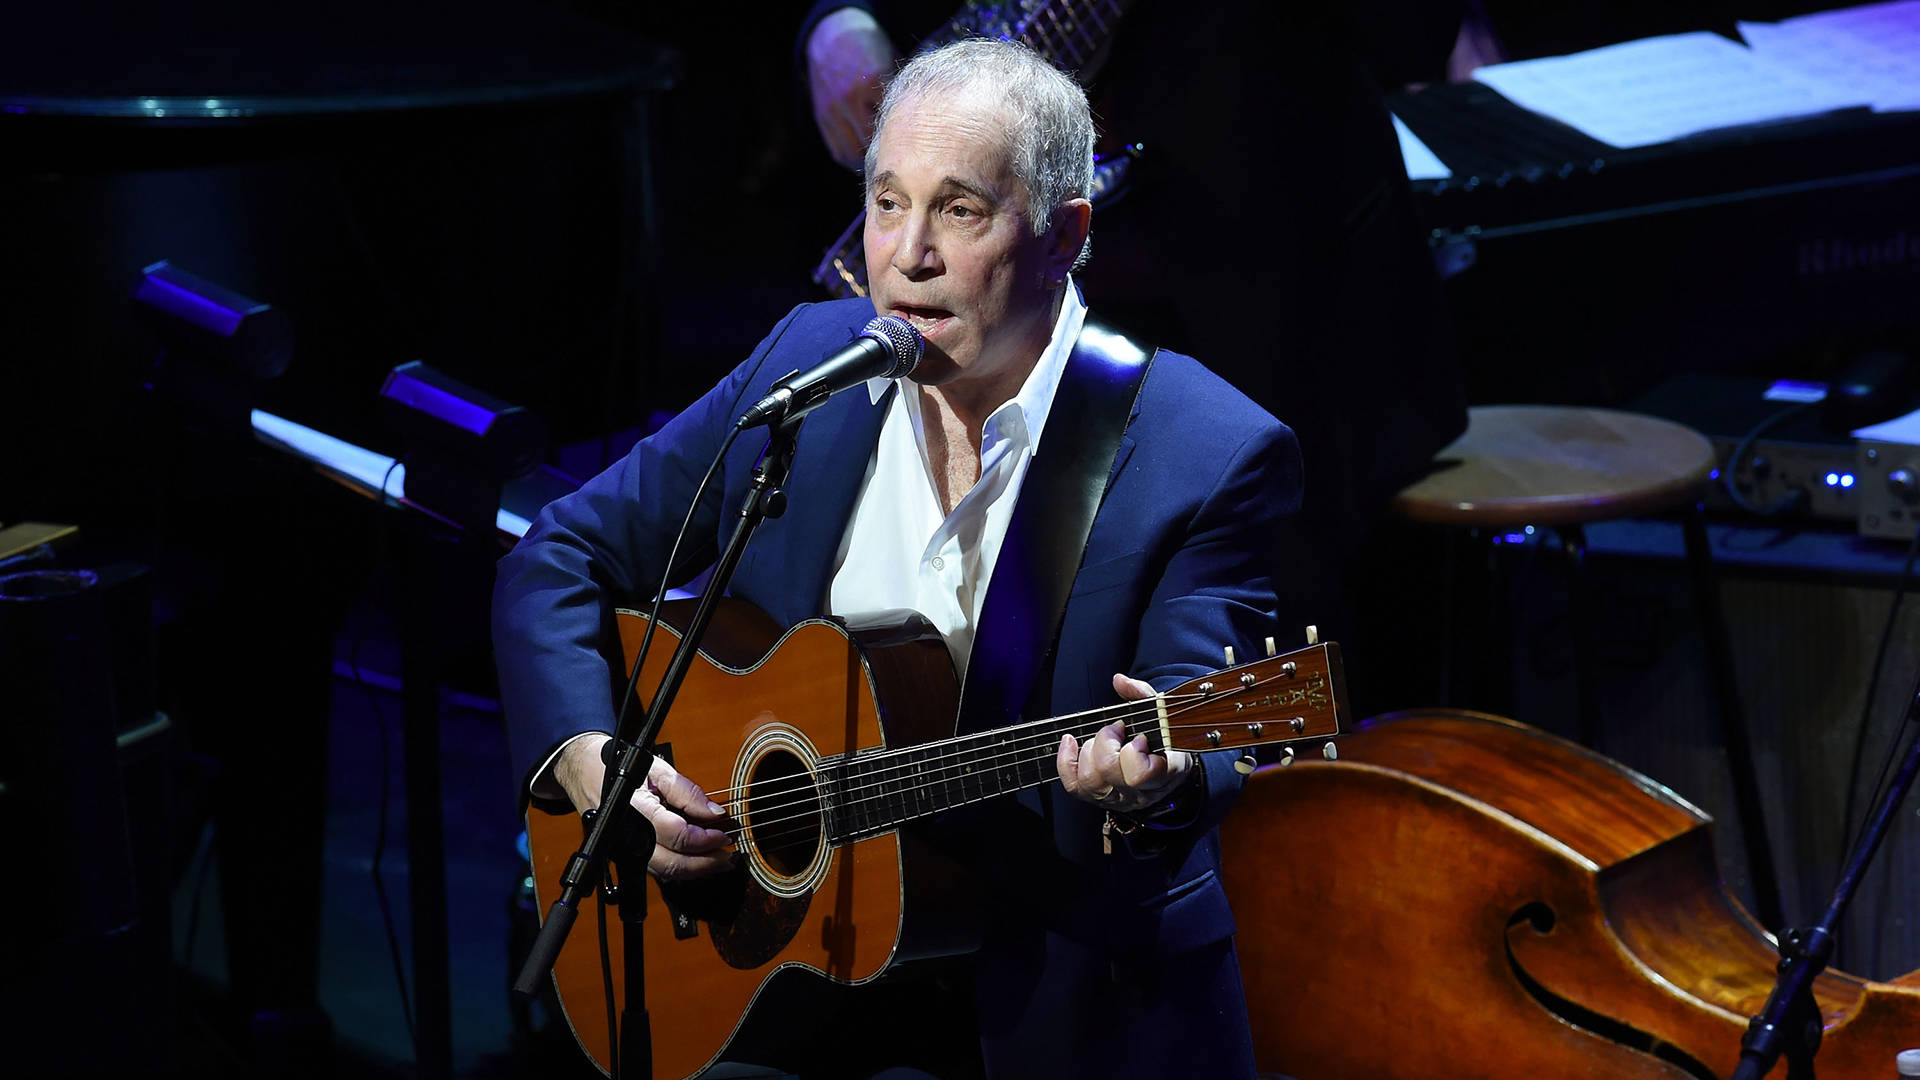 Paul Simon performs during The Nearness Of You Benefit Concert at Frederick P. Rose Hall, Jazz at Lincoln Center on January 20, 2015 in New York City.   Ilya S. Savenok/Getty Images